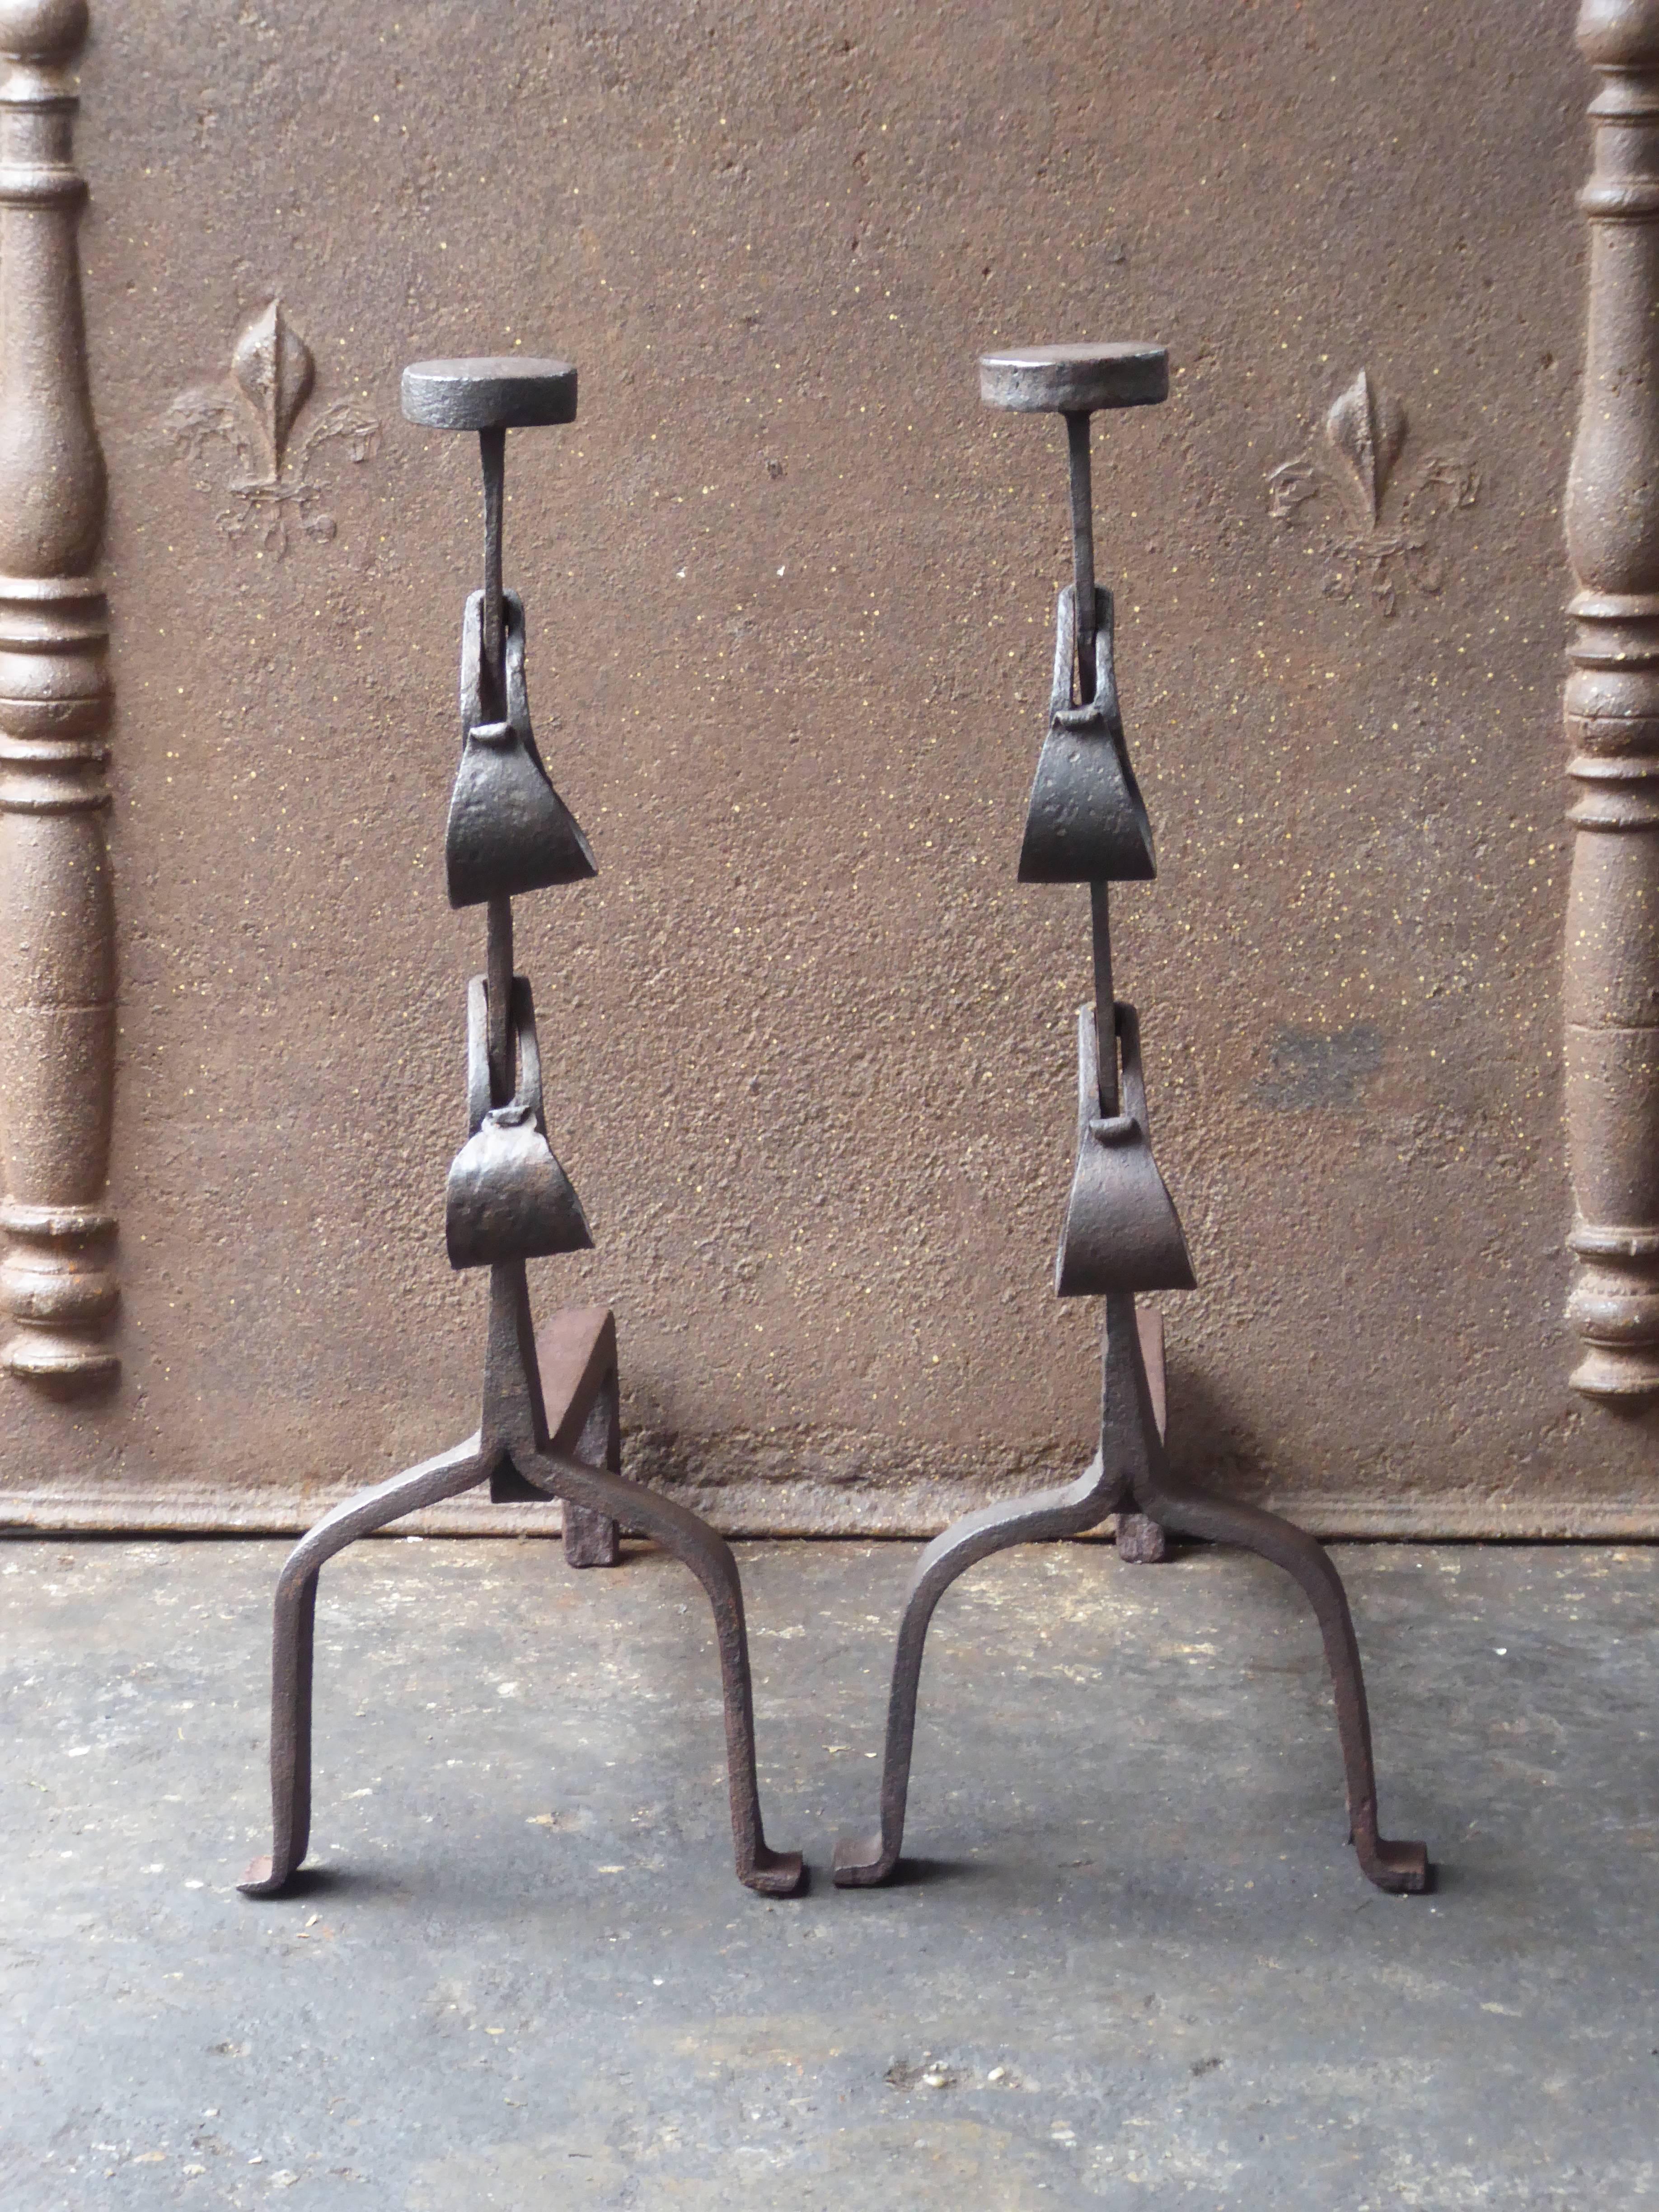 18th century French Louis XV andirons made of wrought iron. The condition is good.

